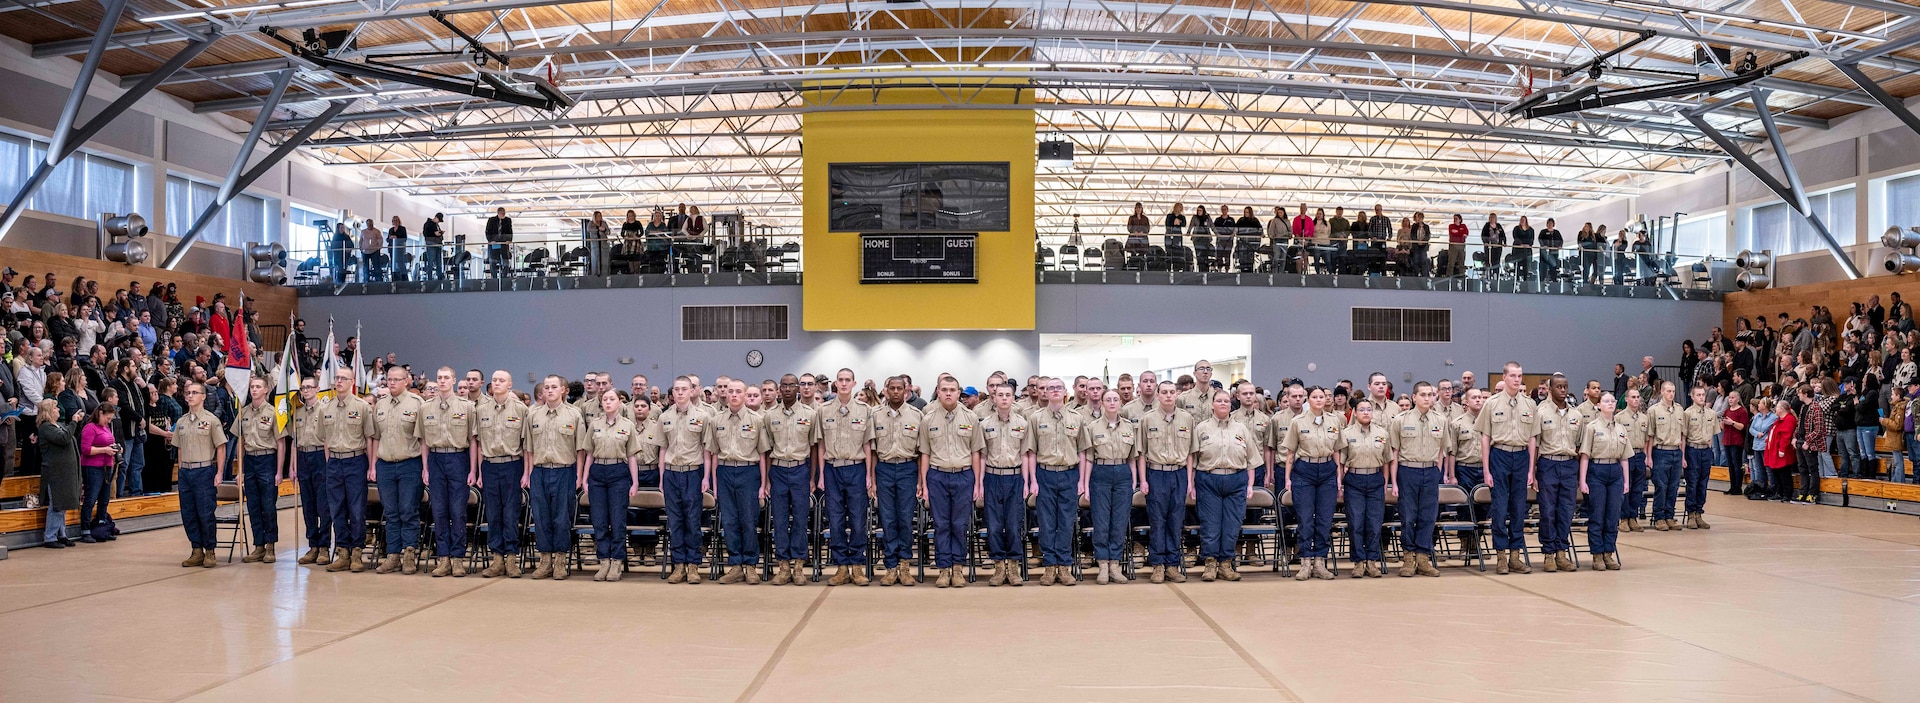 Cadets from Class 2-2023/Cycle 61 of the Mountaineer ChalleNGe Academy-North stand at attention during their graduation ceremony held at Camp Dawson, Kingwood, West Virginia, December 15, 2023. A total of 101 cadets graduated from the 22-week quasi military program, 66 graduating with a high school diploma. (U.S. Army National Guard photo by Edwin L. Wriston)